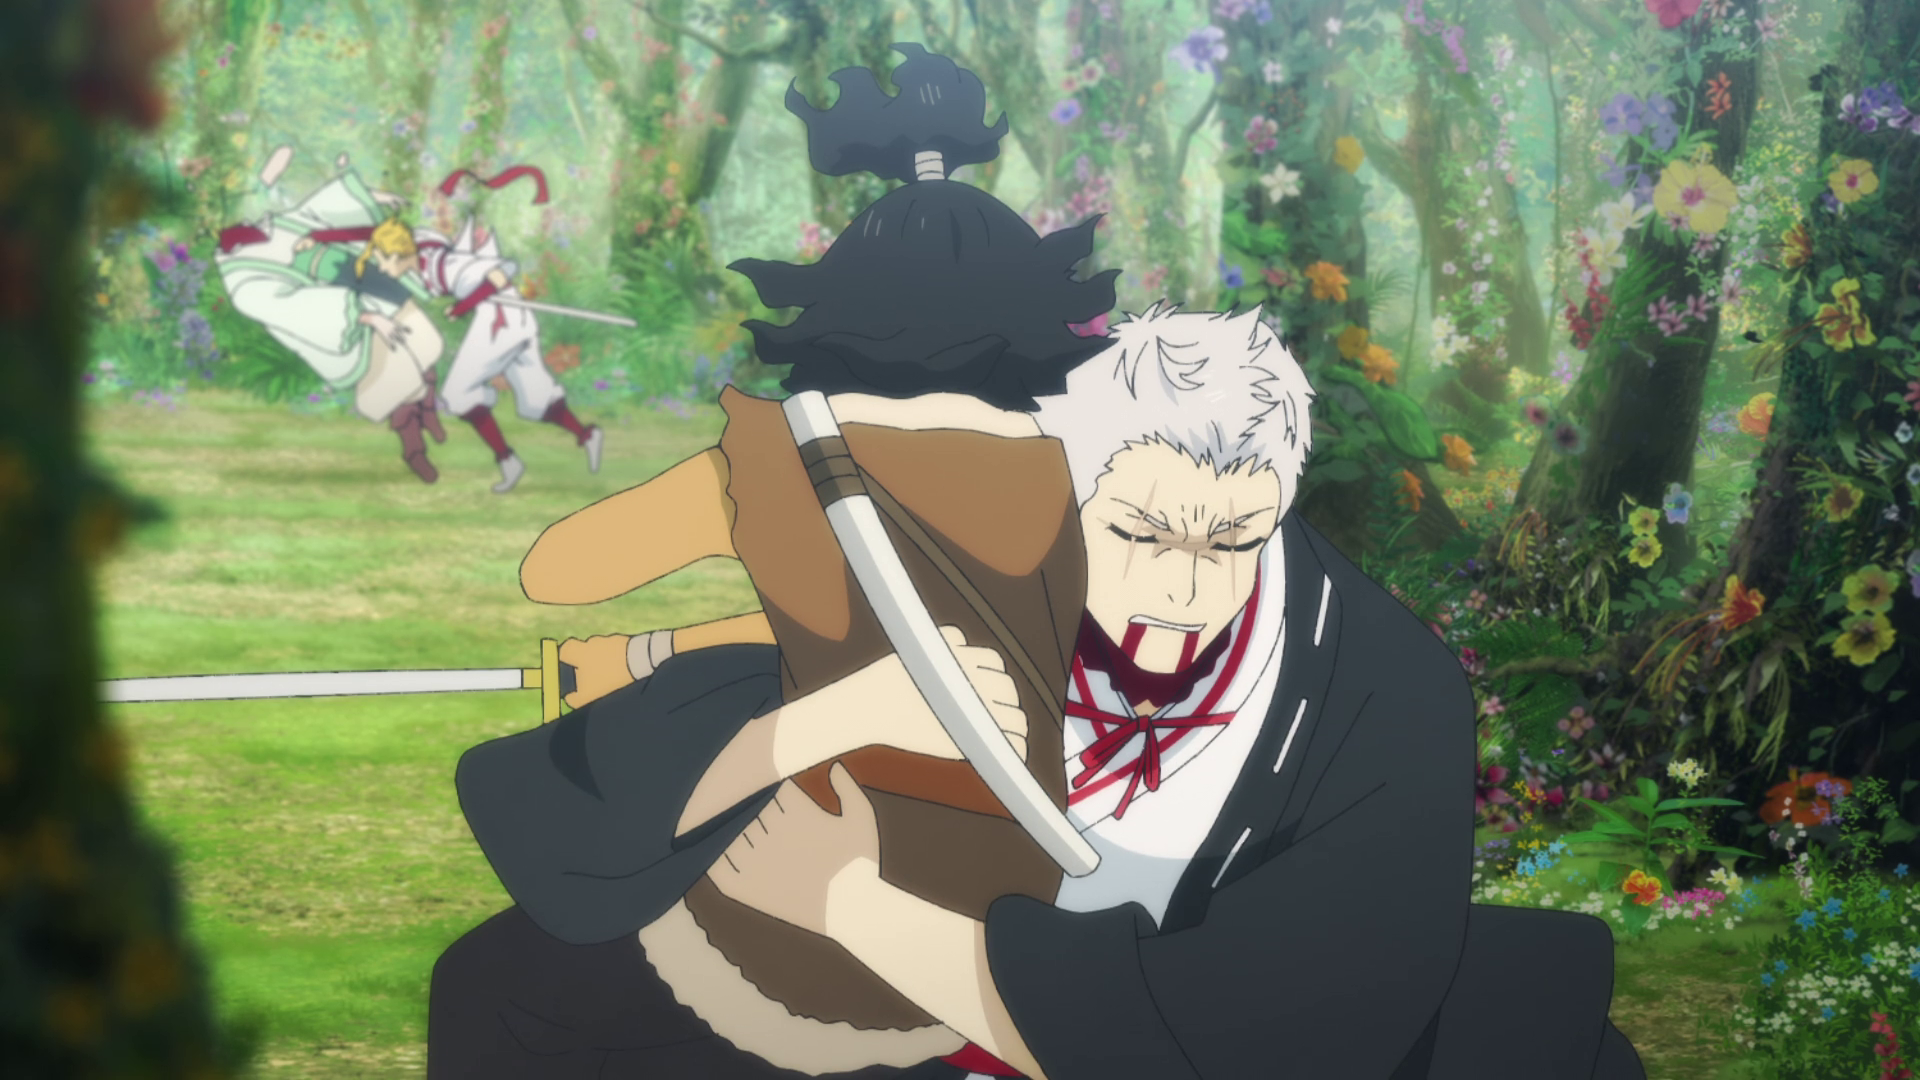 Hell's Paradise episode 8 preview hints at Tenza's past and determination